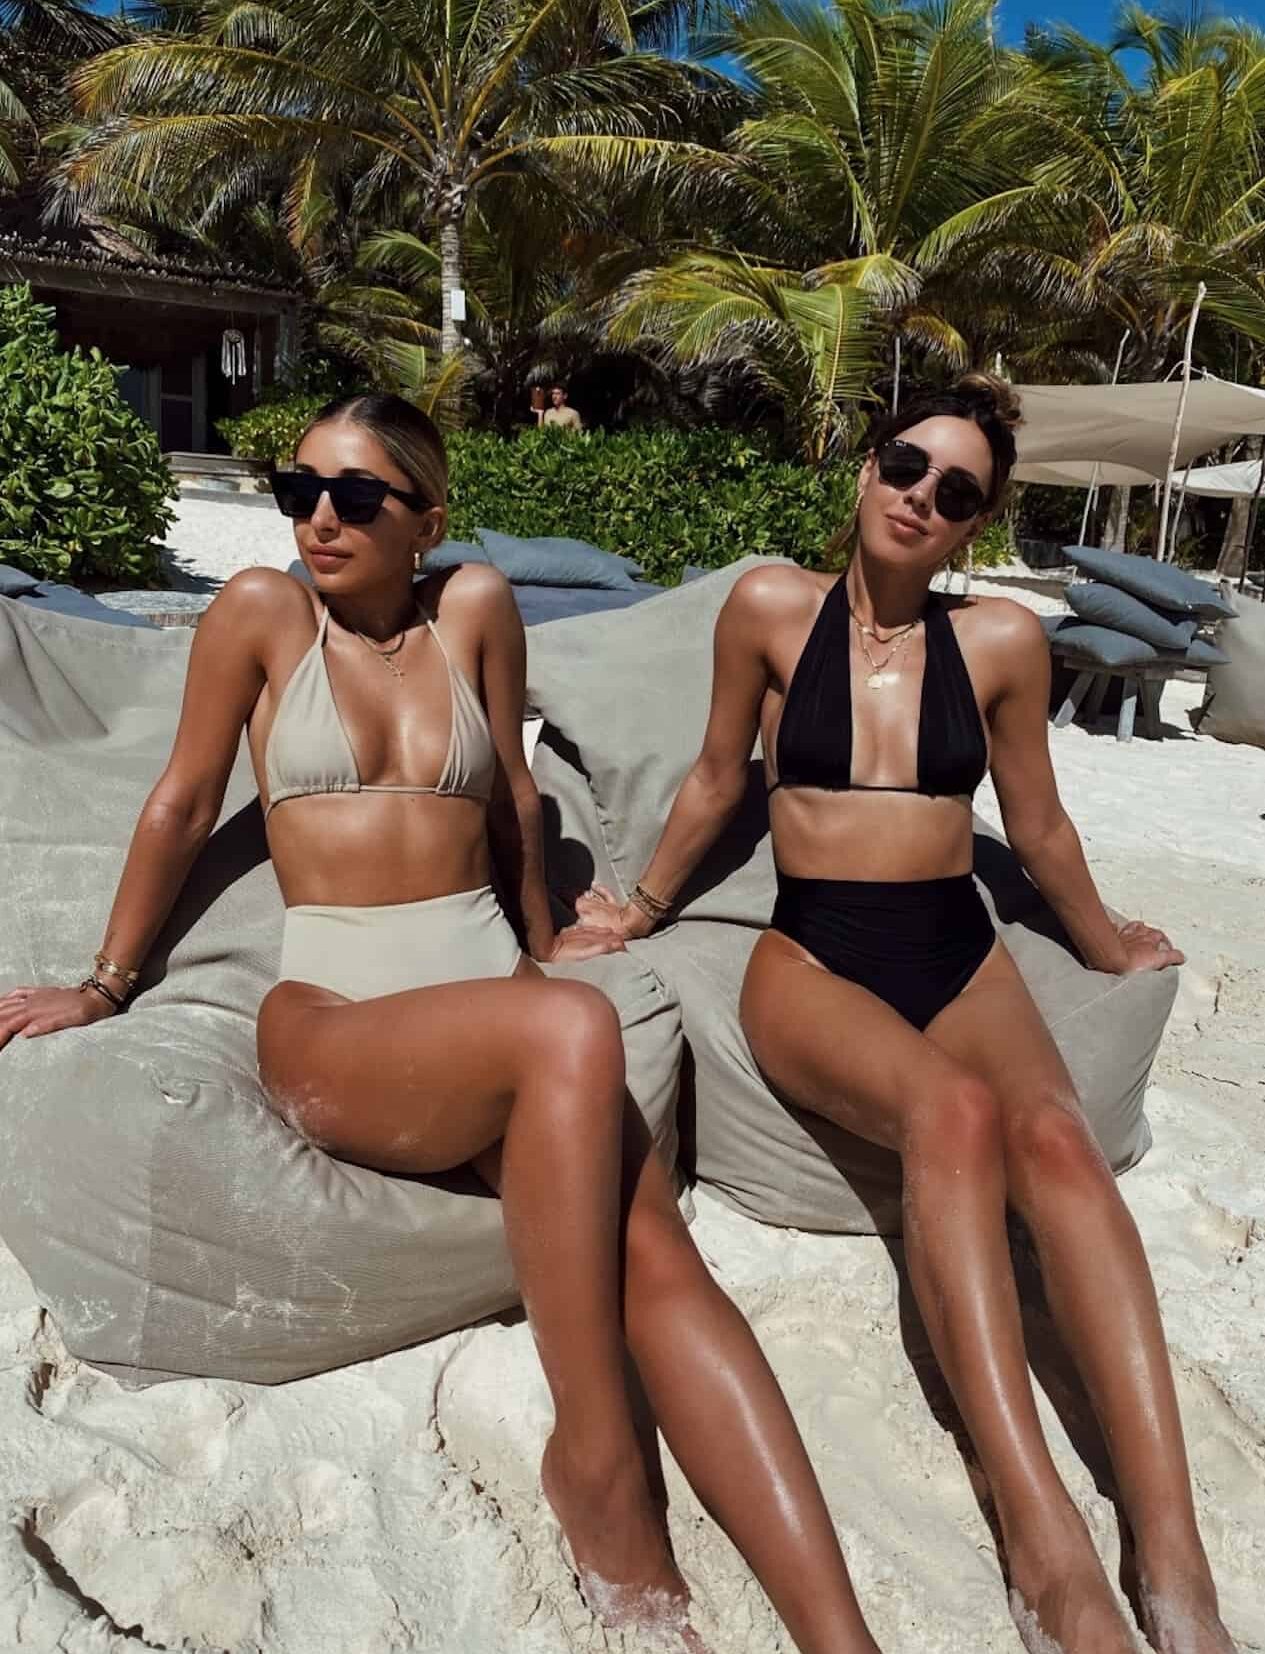 Two women in high-waisted bikinis on the beach in Mexico.